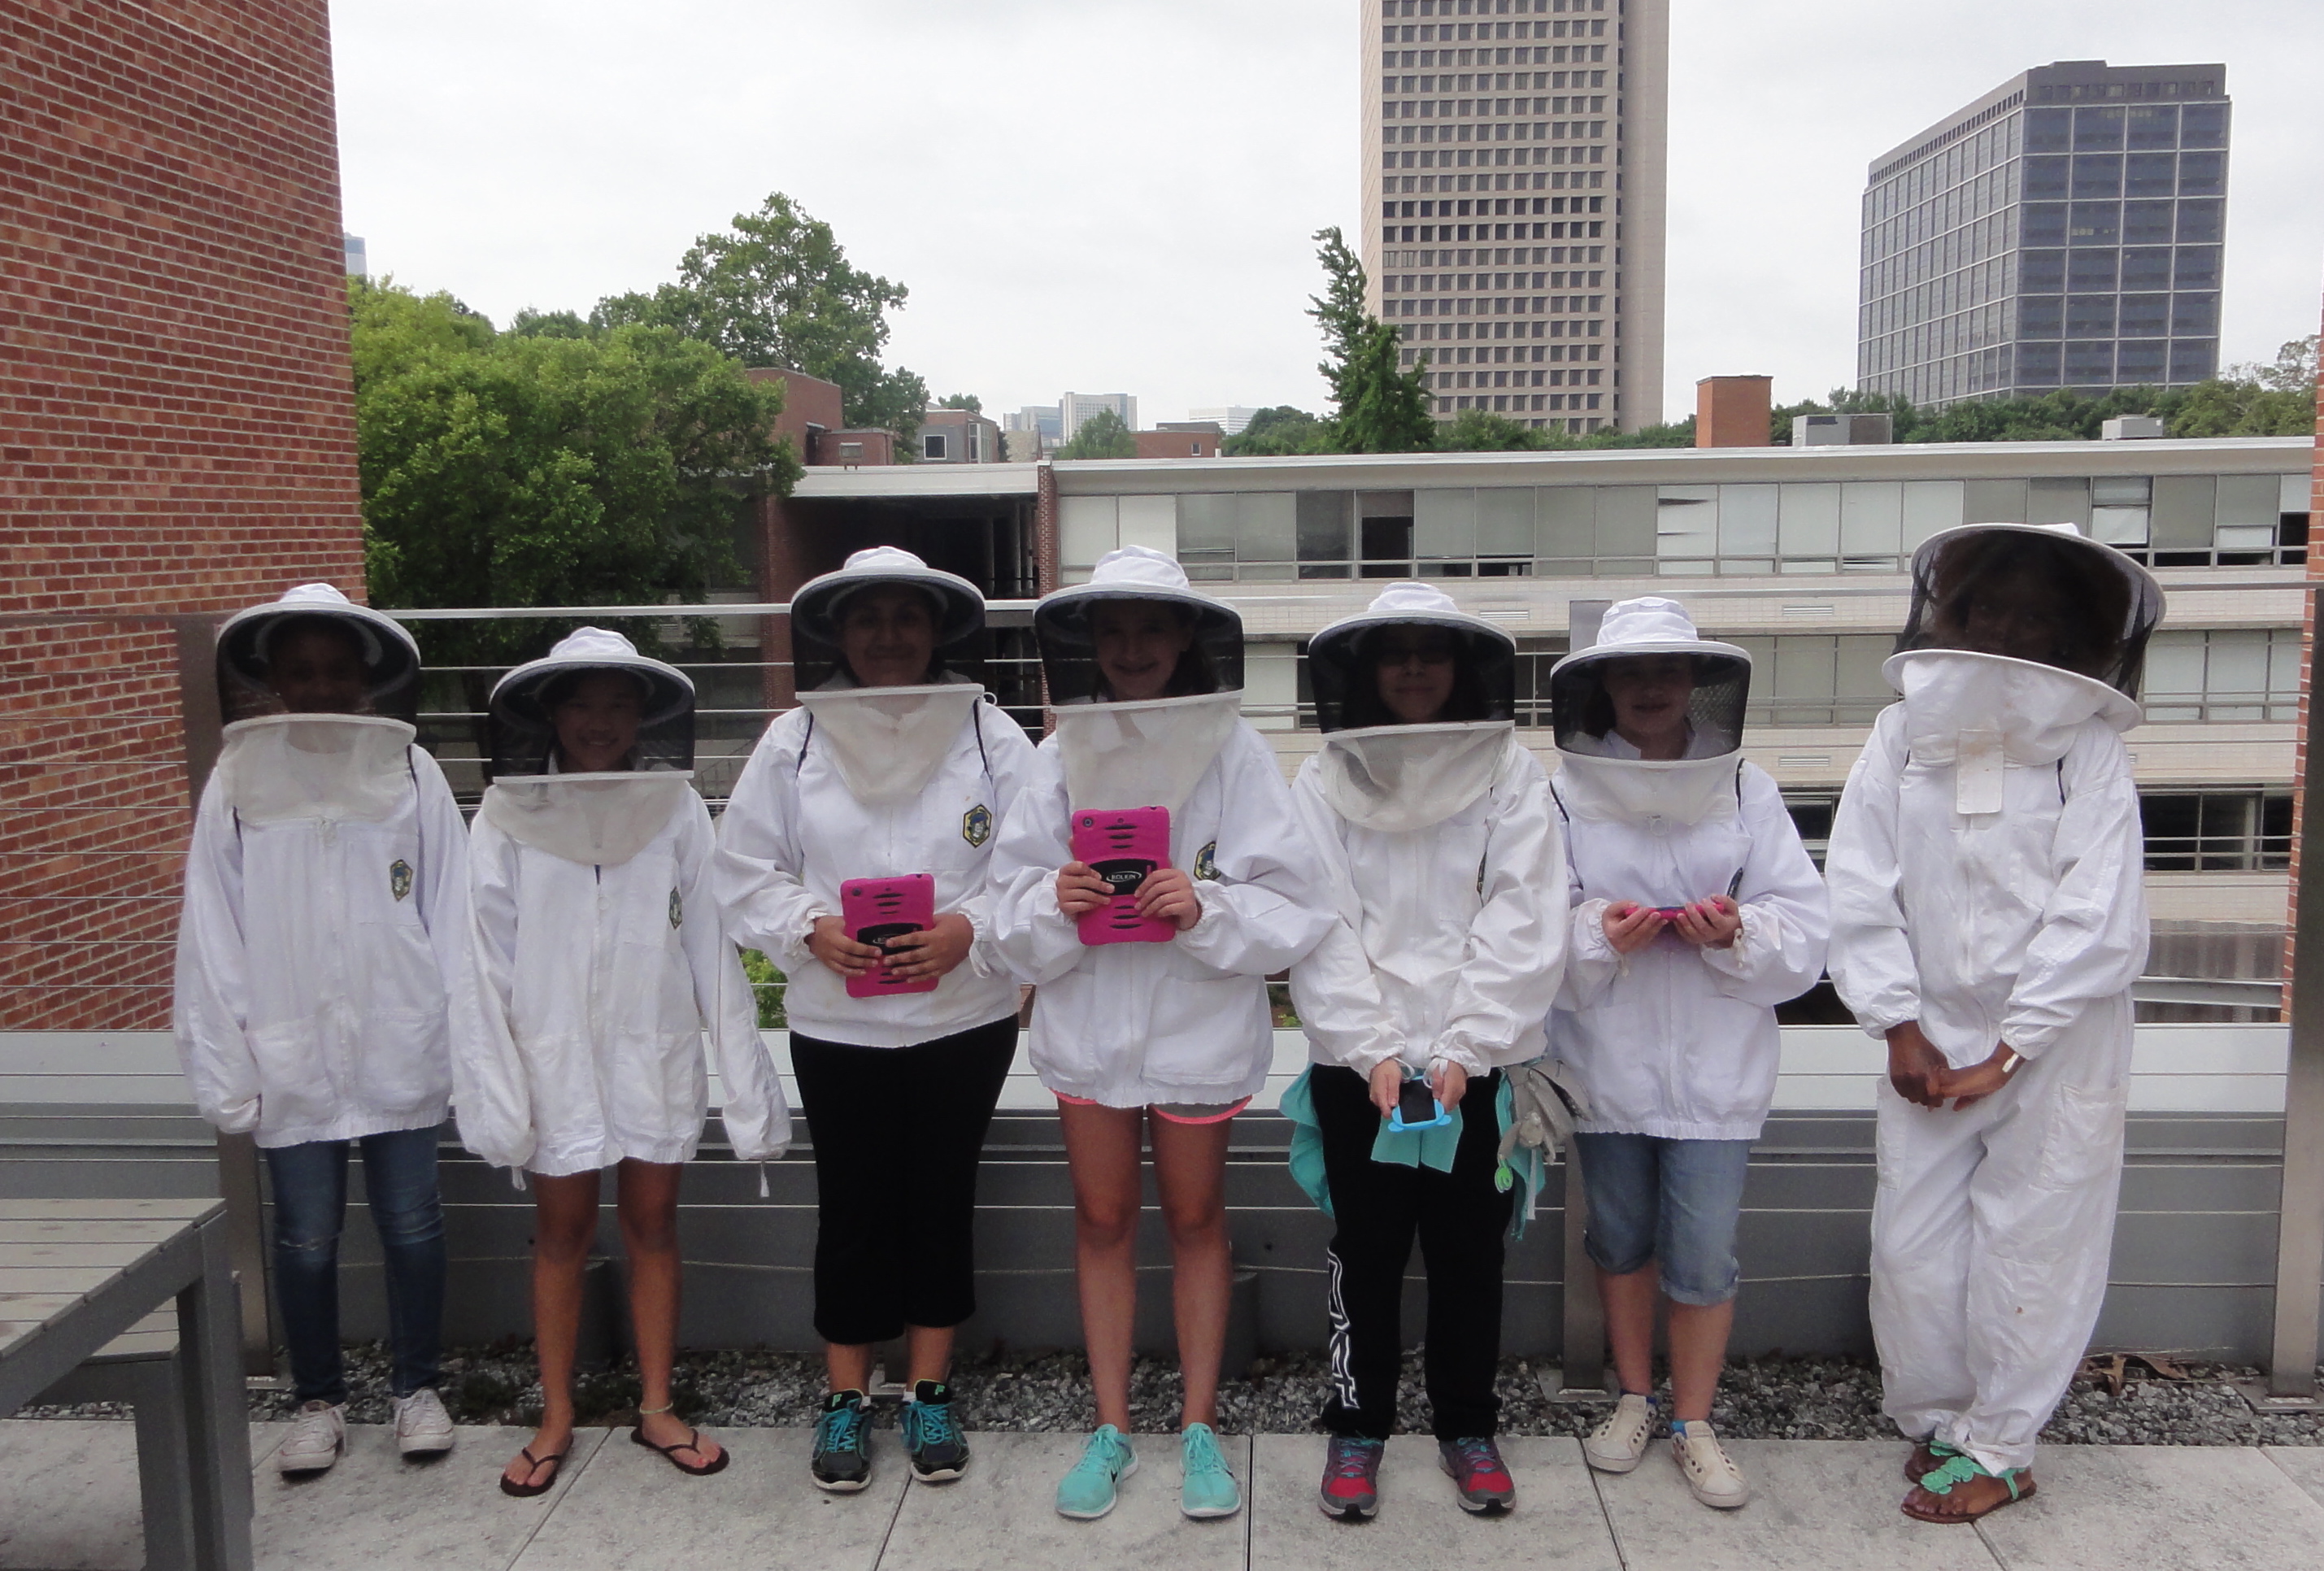 More than 25 girls from metro Atlanta middle schools are spending the week at Georgia Tech to learn about science, technology, engineering and math. Last year’s group the girls learned about the bees on the roof of the Clough Commons and this year’s class received a tour Tuesday. 